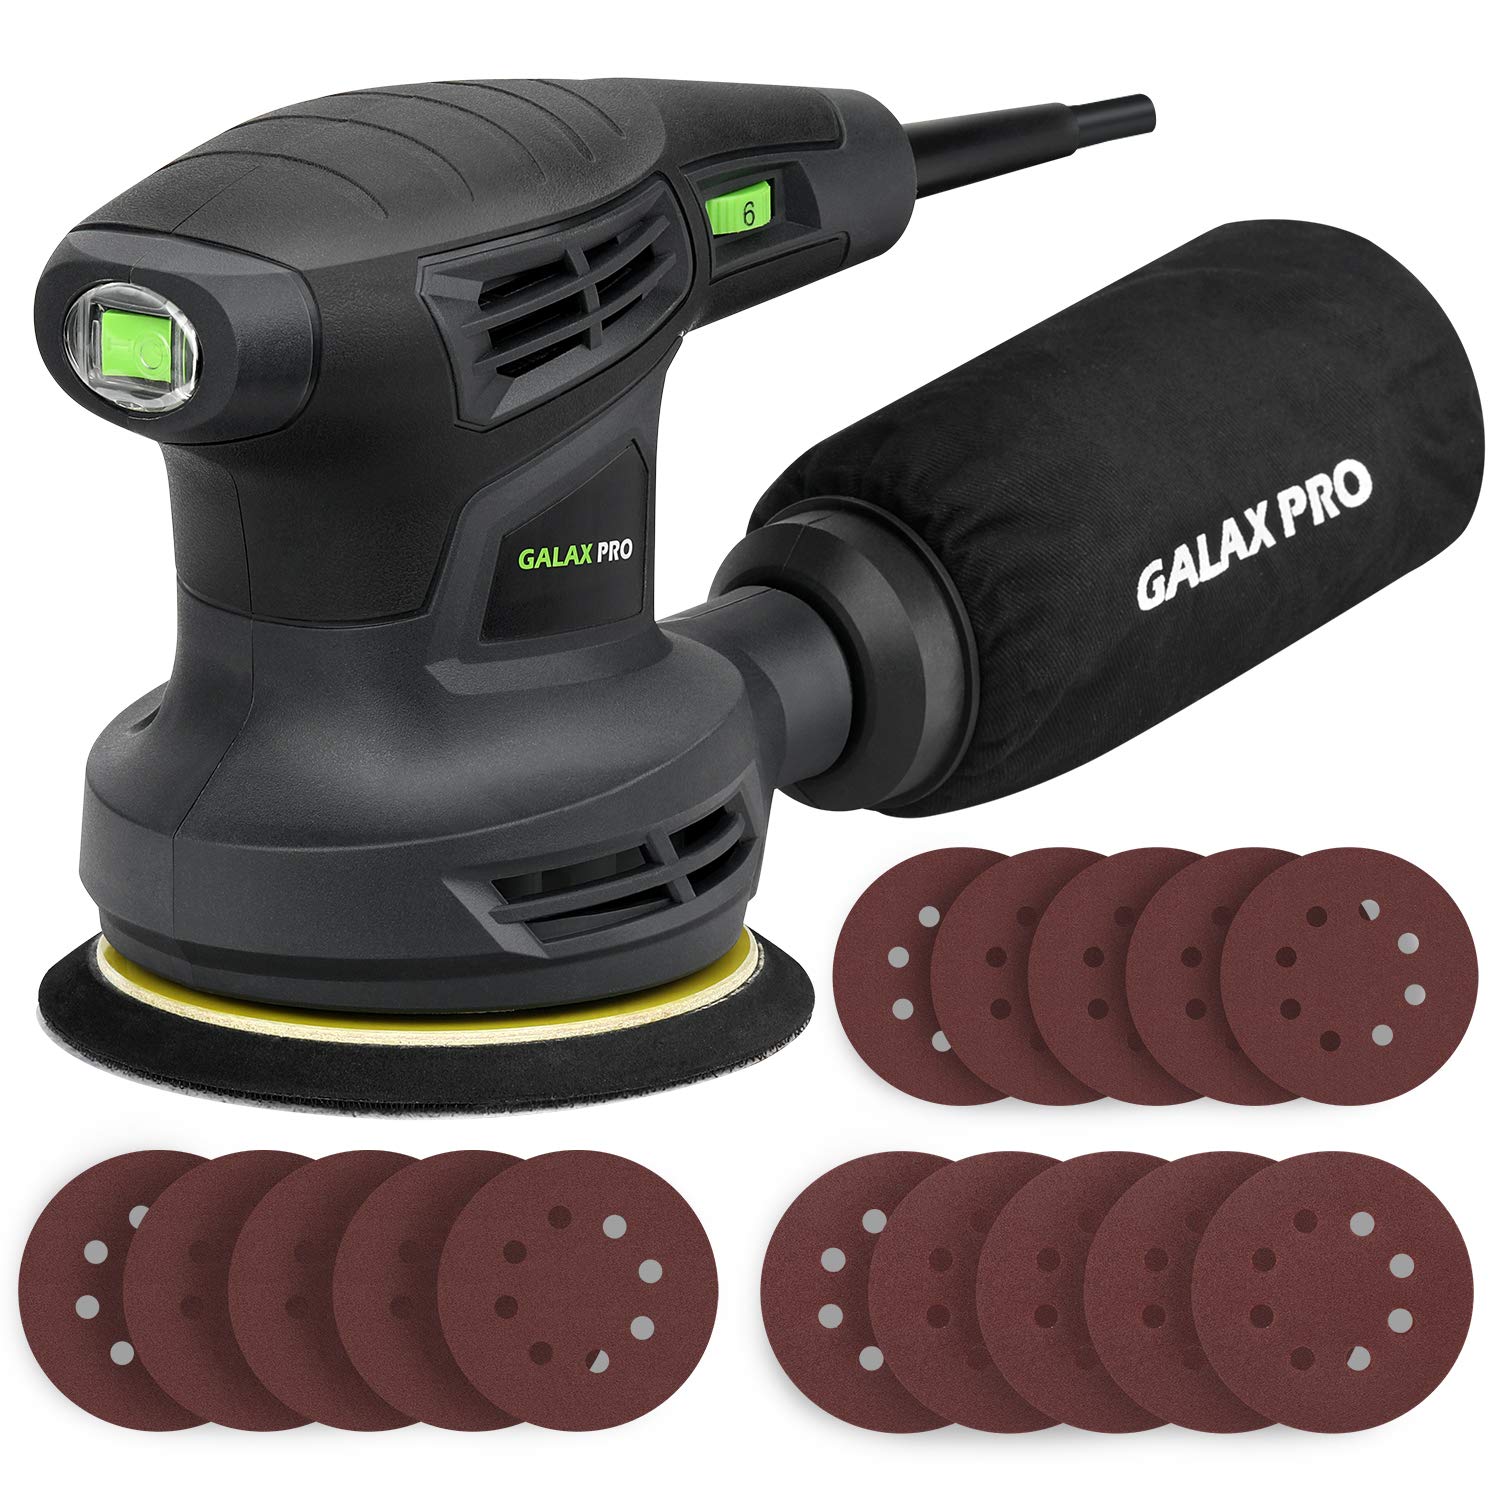 GALAX PRO 280W 13000OPM Max 6 Variable Speeds Orbital Sander with 15Pcs Sanding Discs, 5” electric Sander with Dust Collector fo